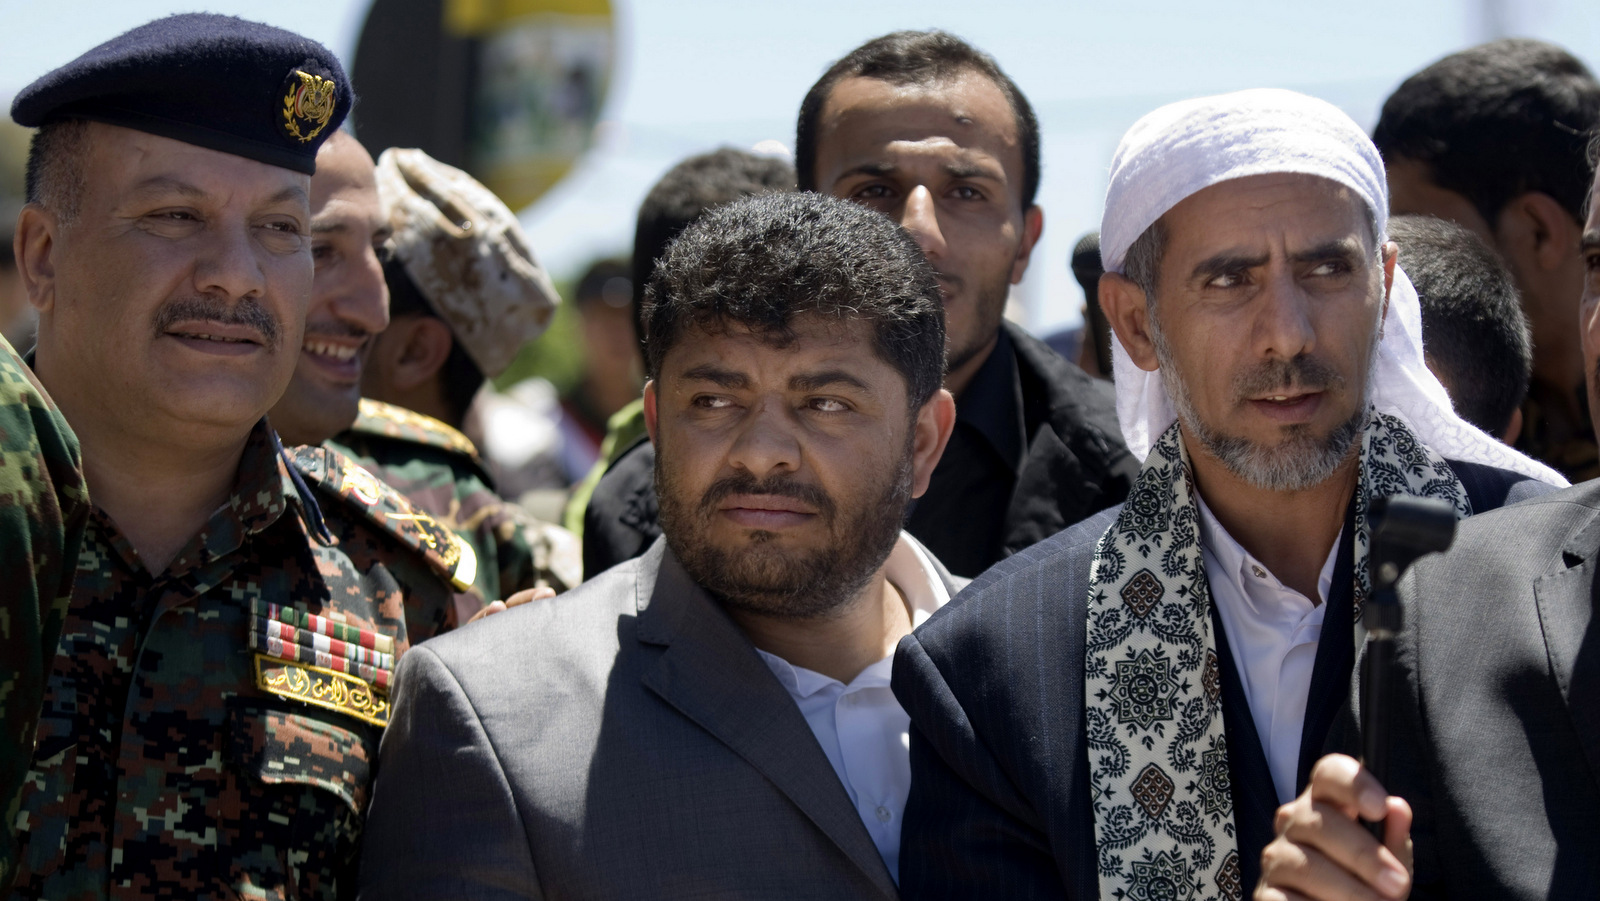 Mohammed Ali al-Houthi, who heads the Houthi rebels' powerful Revolutionary Council, center, attends the funeral procession of victims who were killed from triple suicide bombing attacks that hit a pair of mosques in Sanaa, Yemen.(AP/Hani Mohammed)